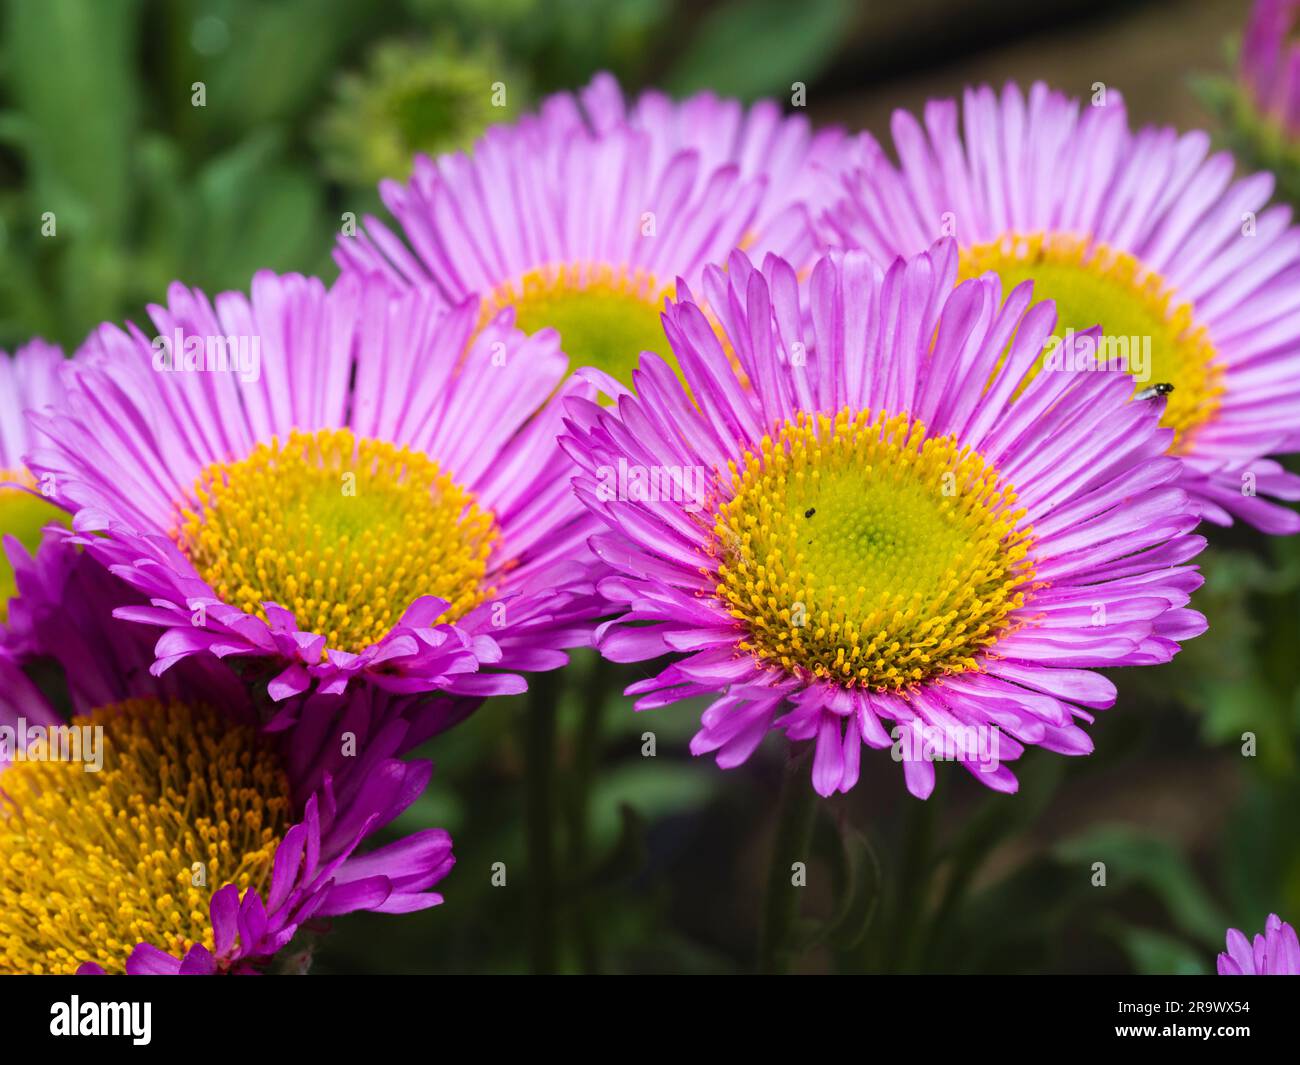 Lilac and yellow summer flowers of the carpeting fleabane, Erigeron glaucus 'Sea Breeze' Stock Photo